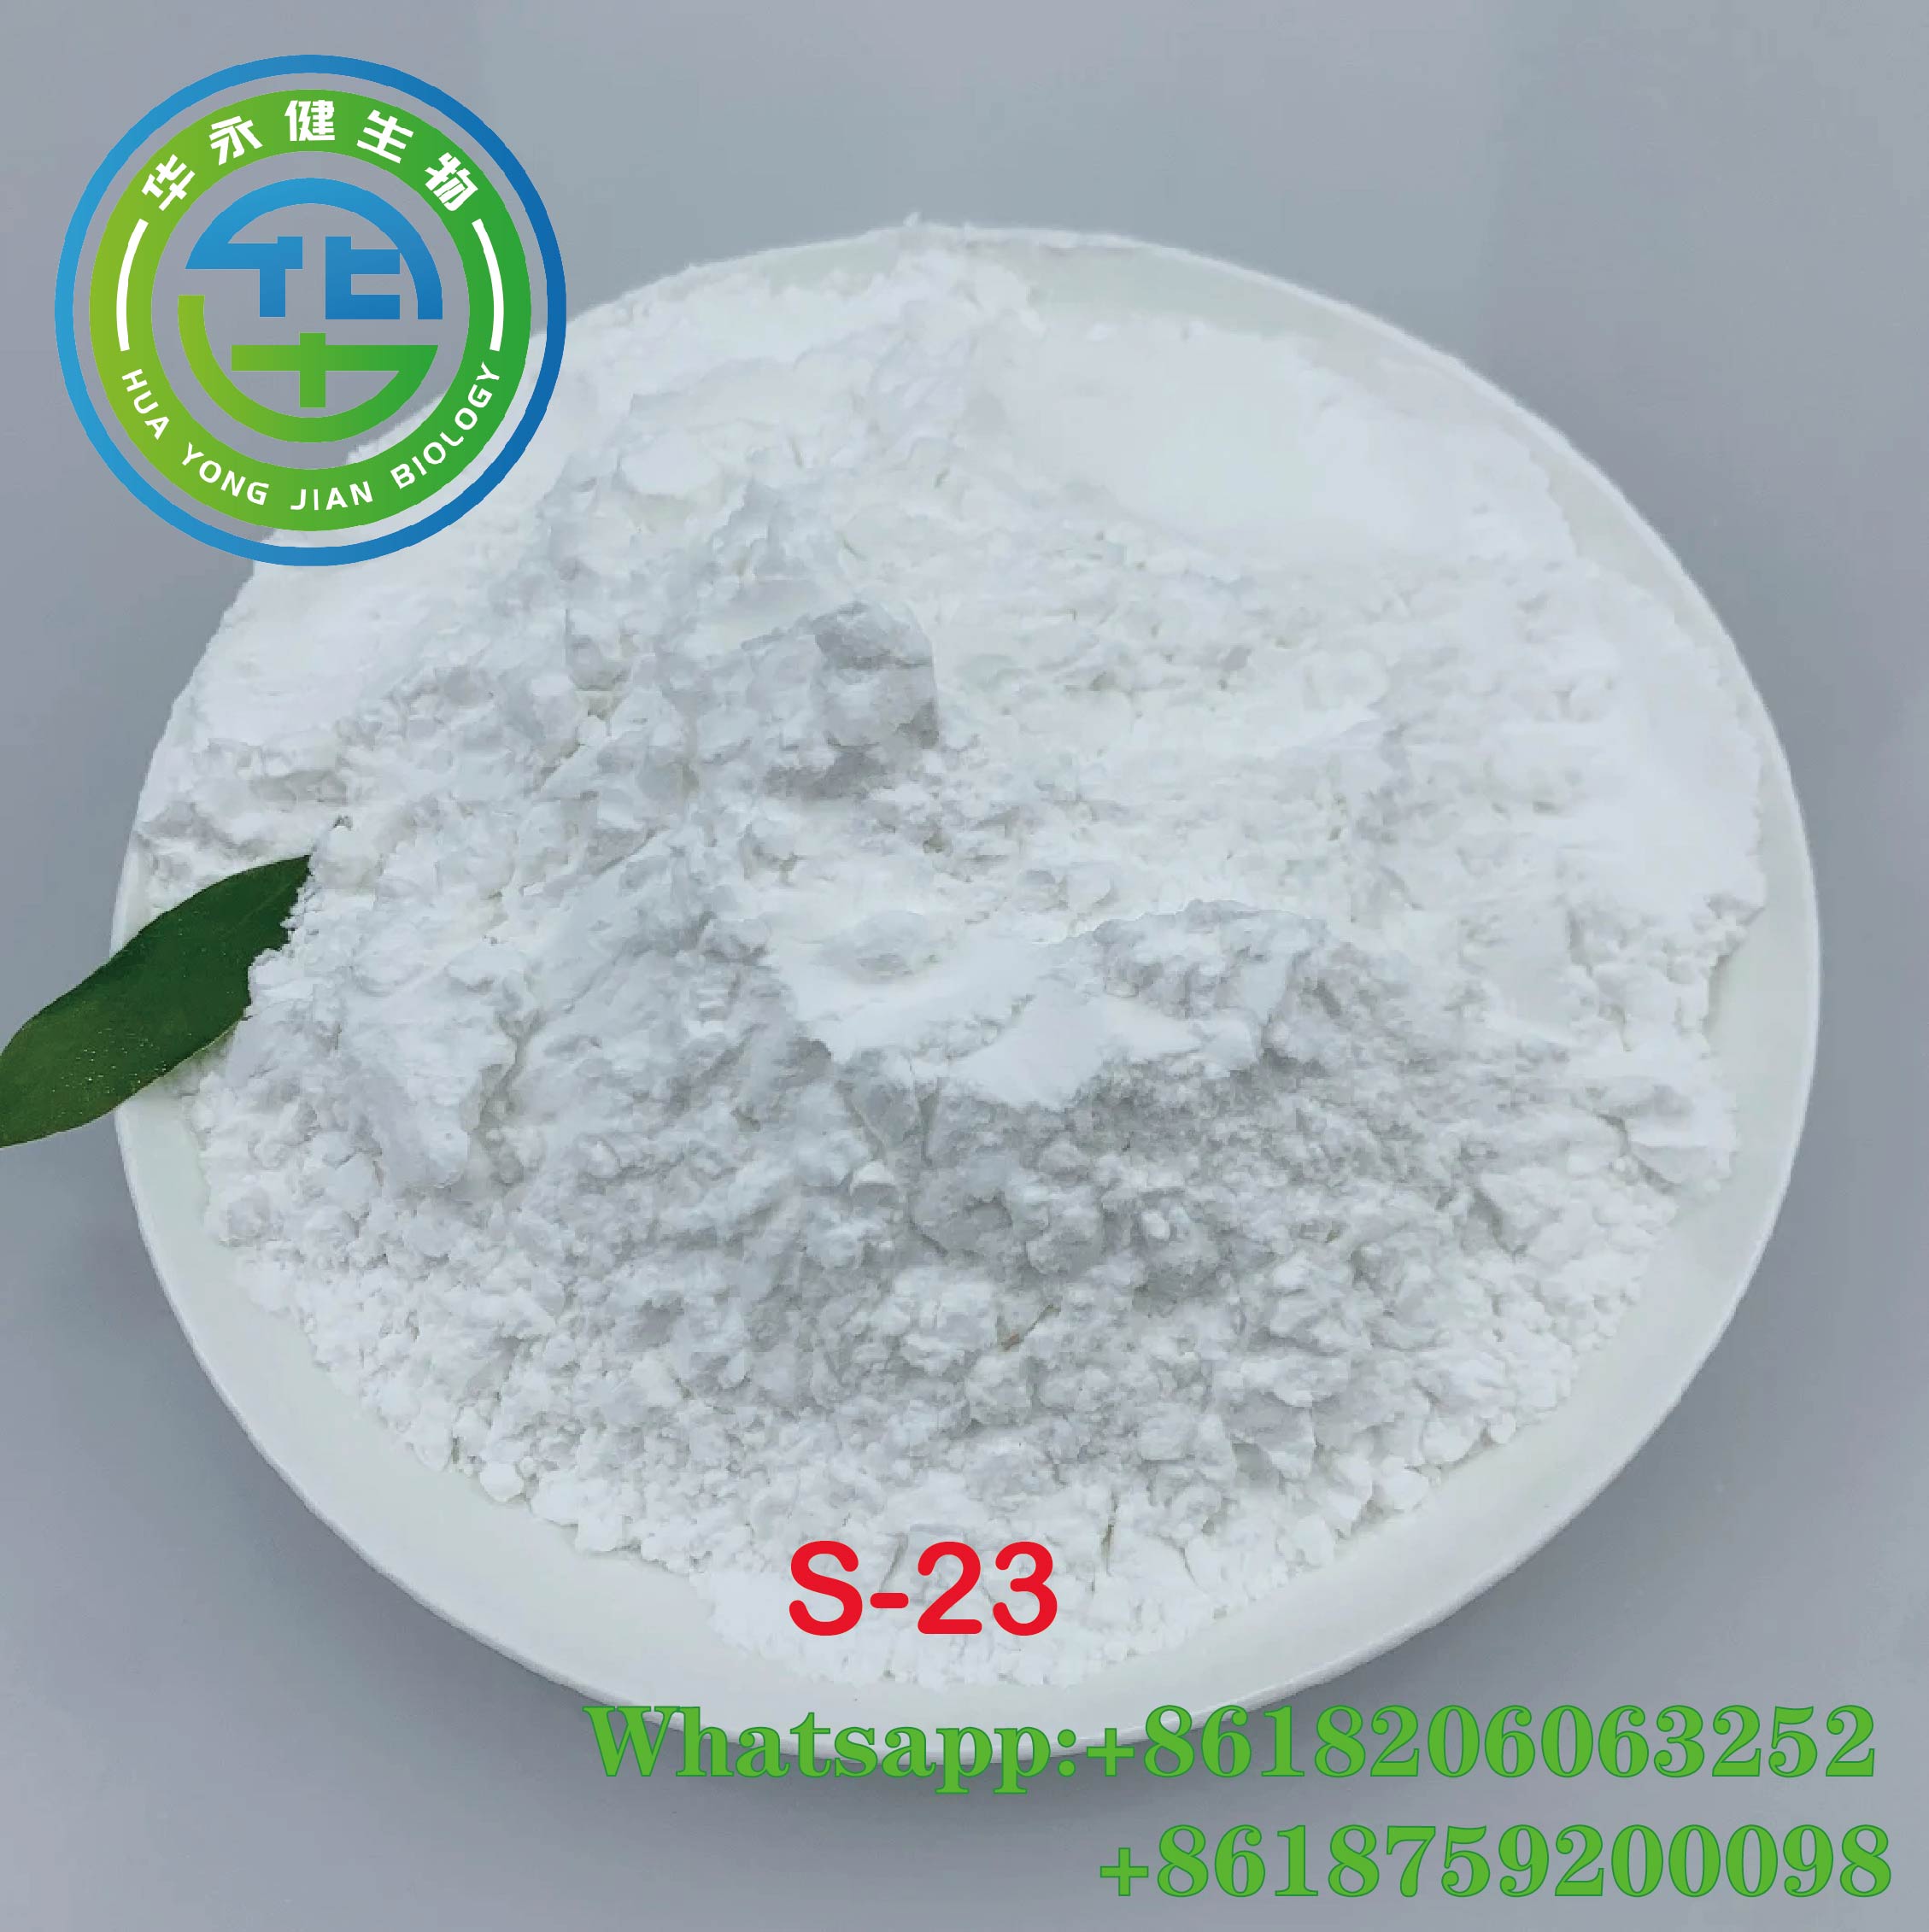 S-23 Sarmpowder for Bodybuilding and Gaining Muscle Mass CasNO.1010396-29-8 100% Safe Shipping Customs Clear